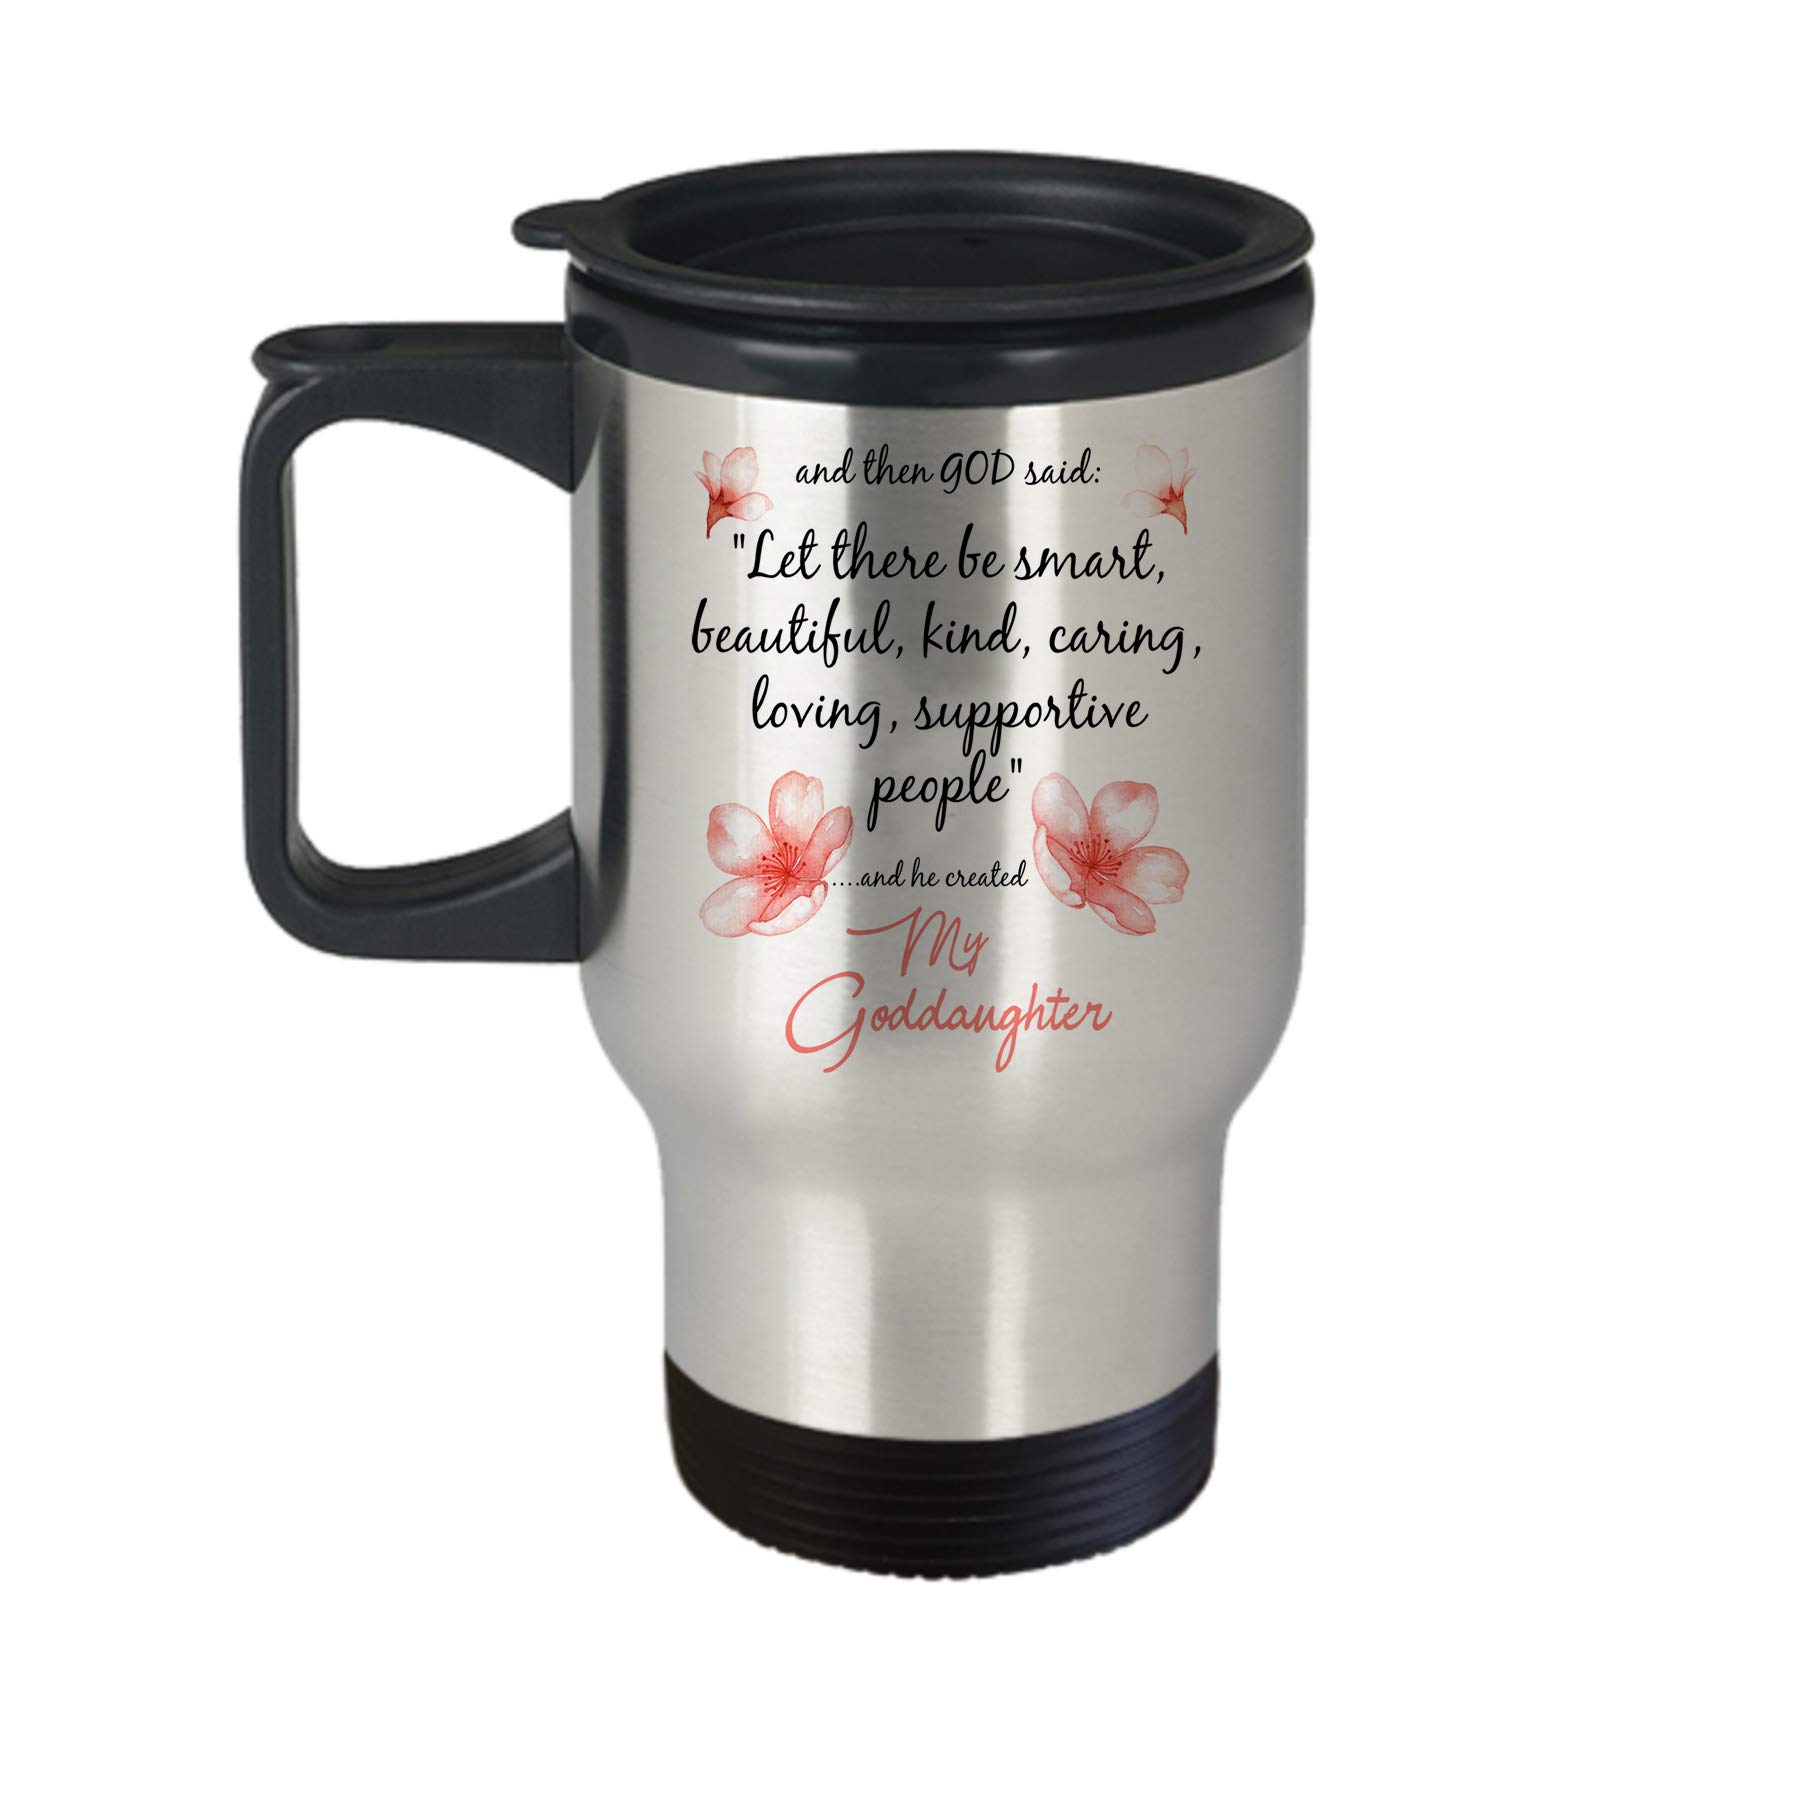 Goddaughter Travel Mug C8TM God Said Religious Christian Funny Gifts For Women Floral Coffee Tea Tumbler Cup With Flowers Best Ever Mother's Day Wedding Birthday Present Ideas 14 oz